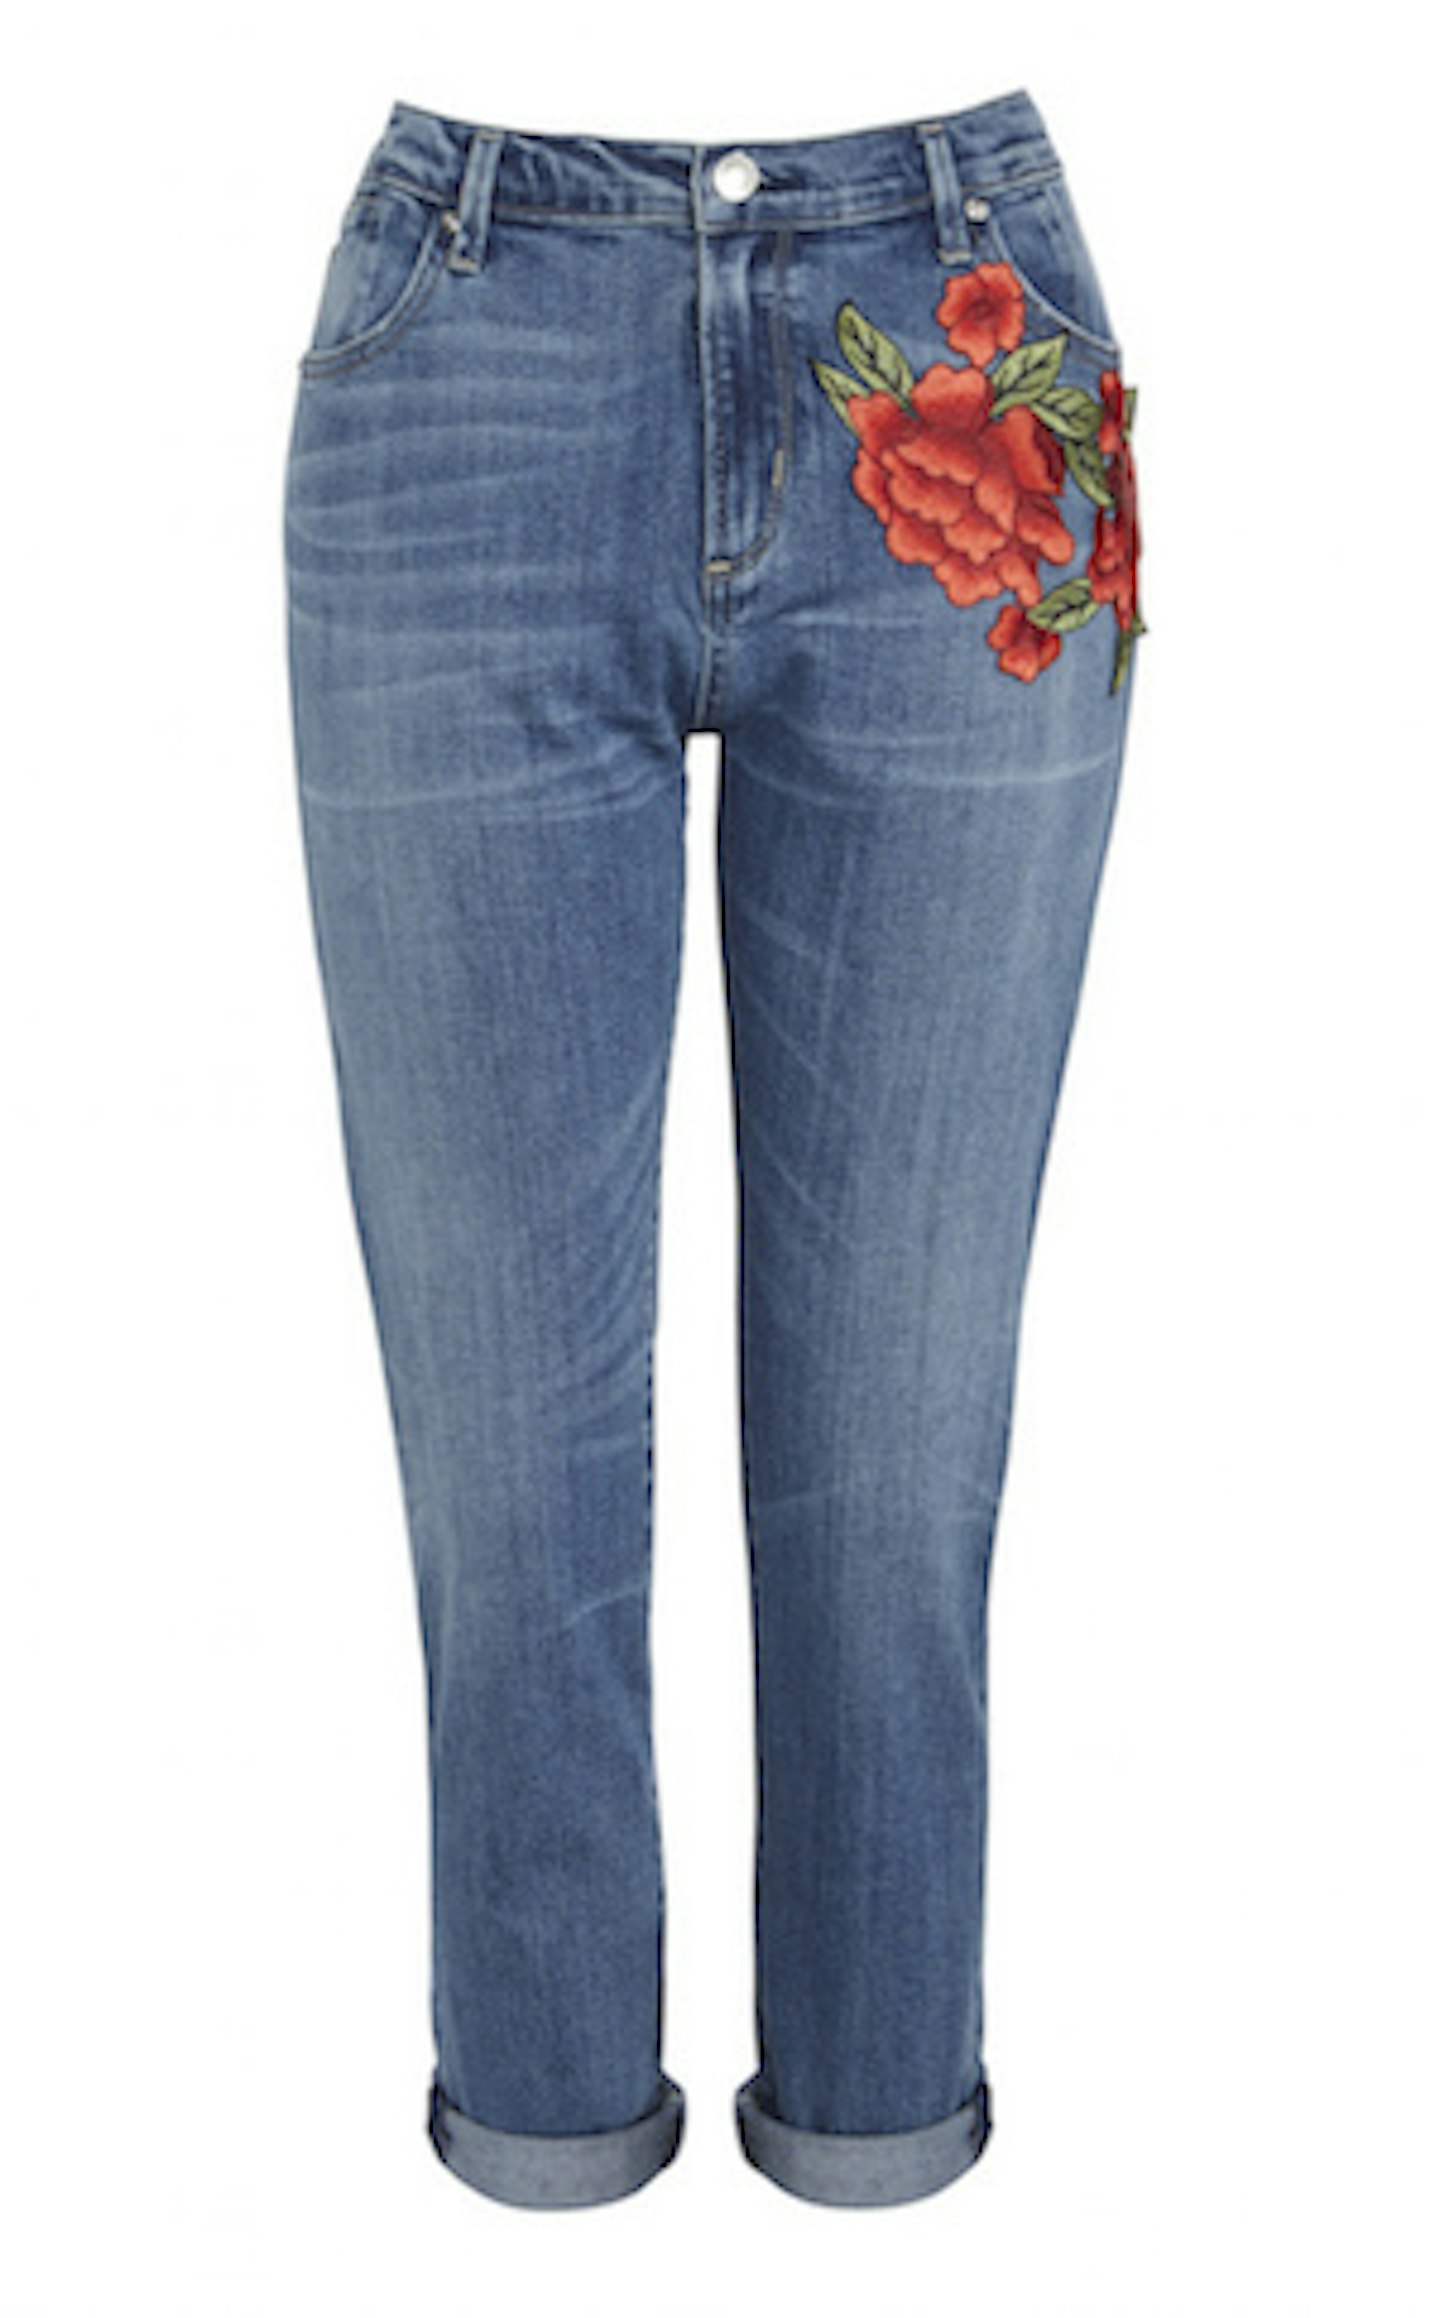 Embroidered Jeans £18